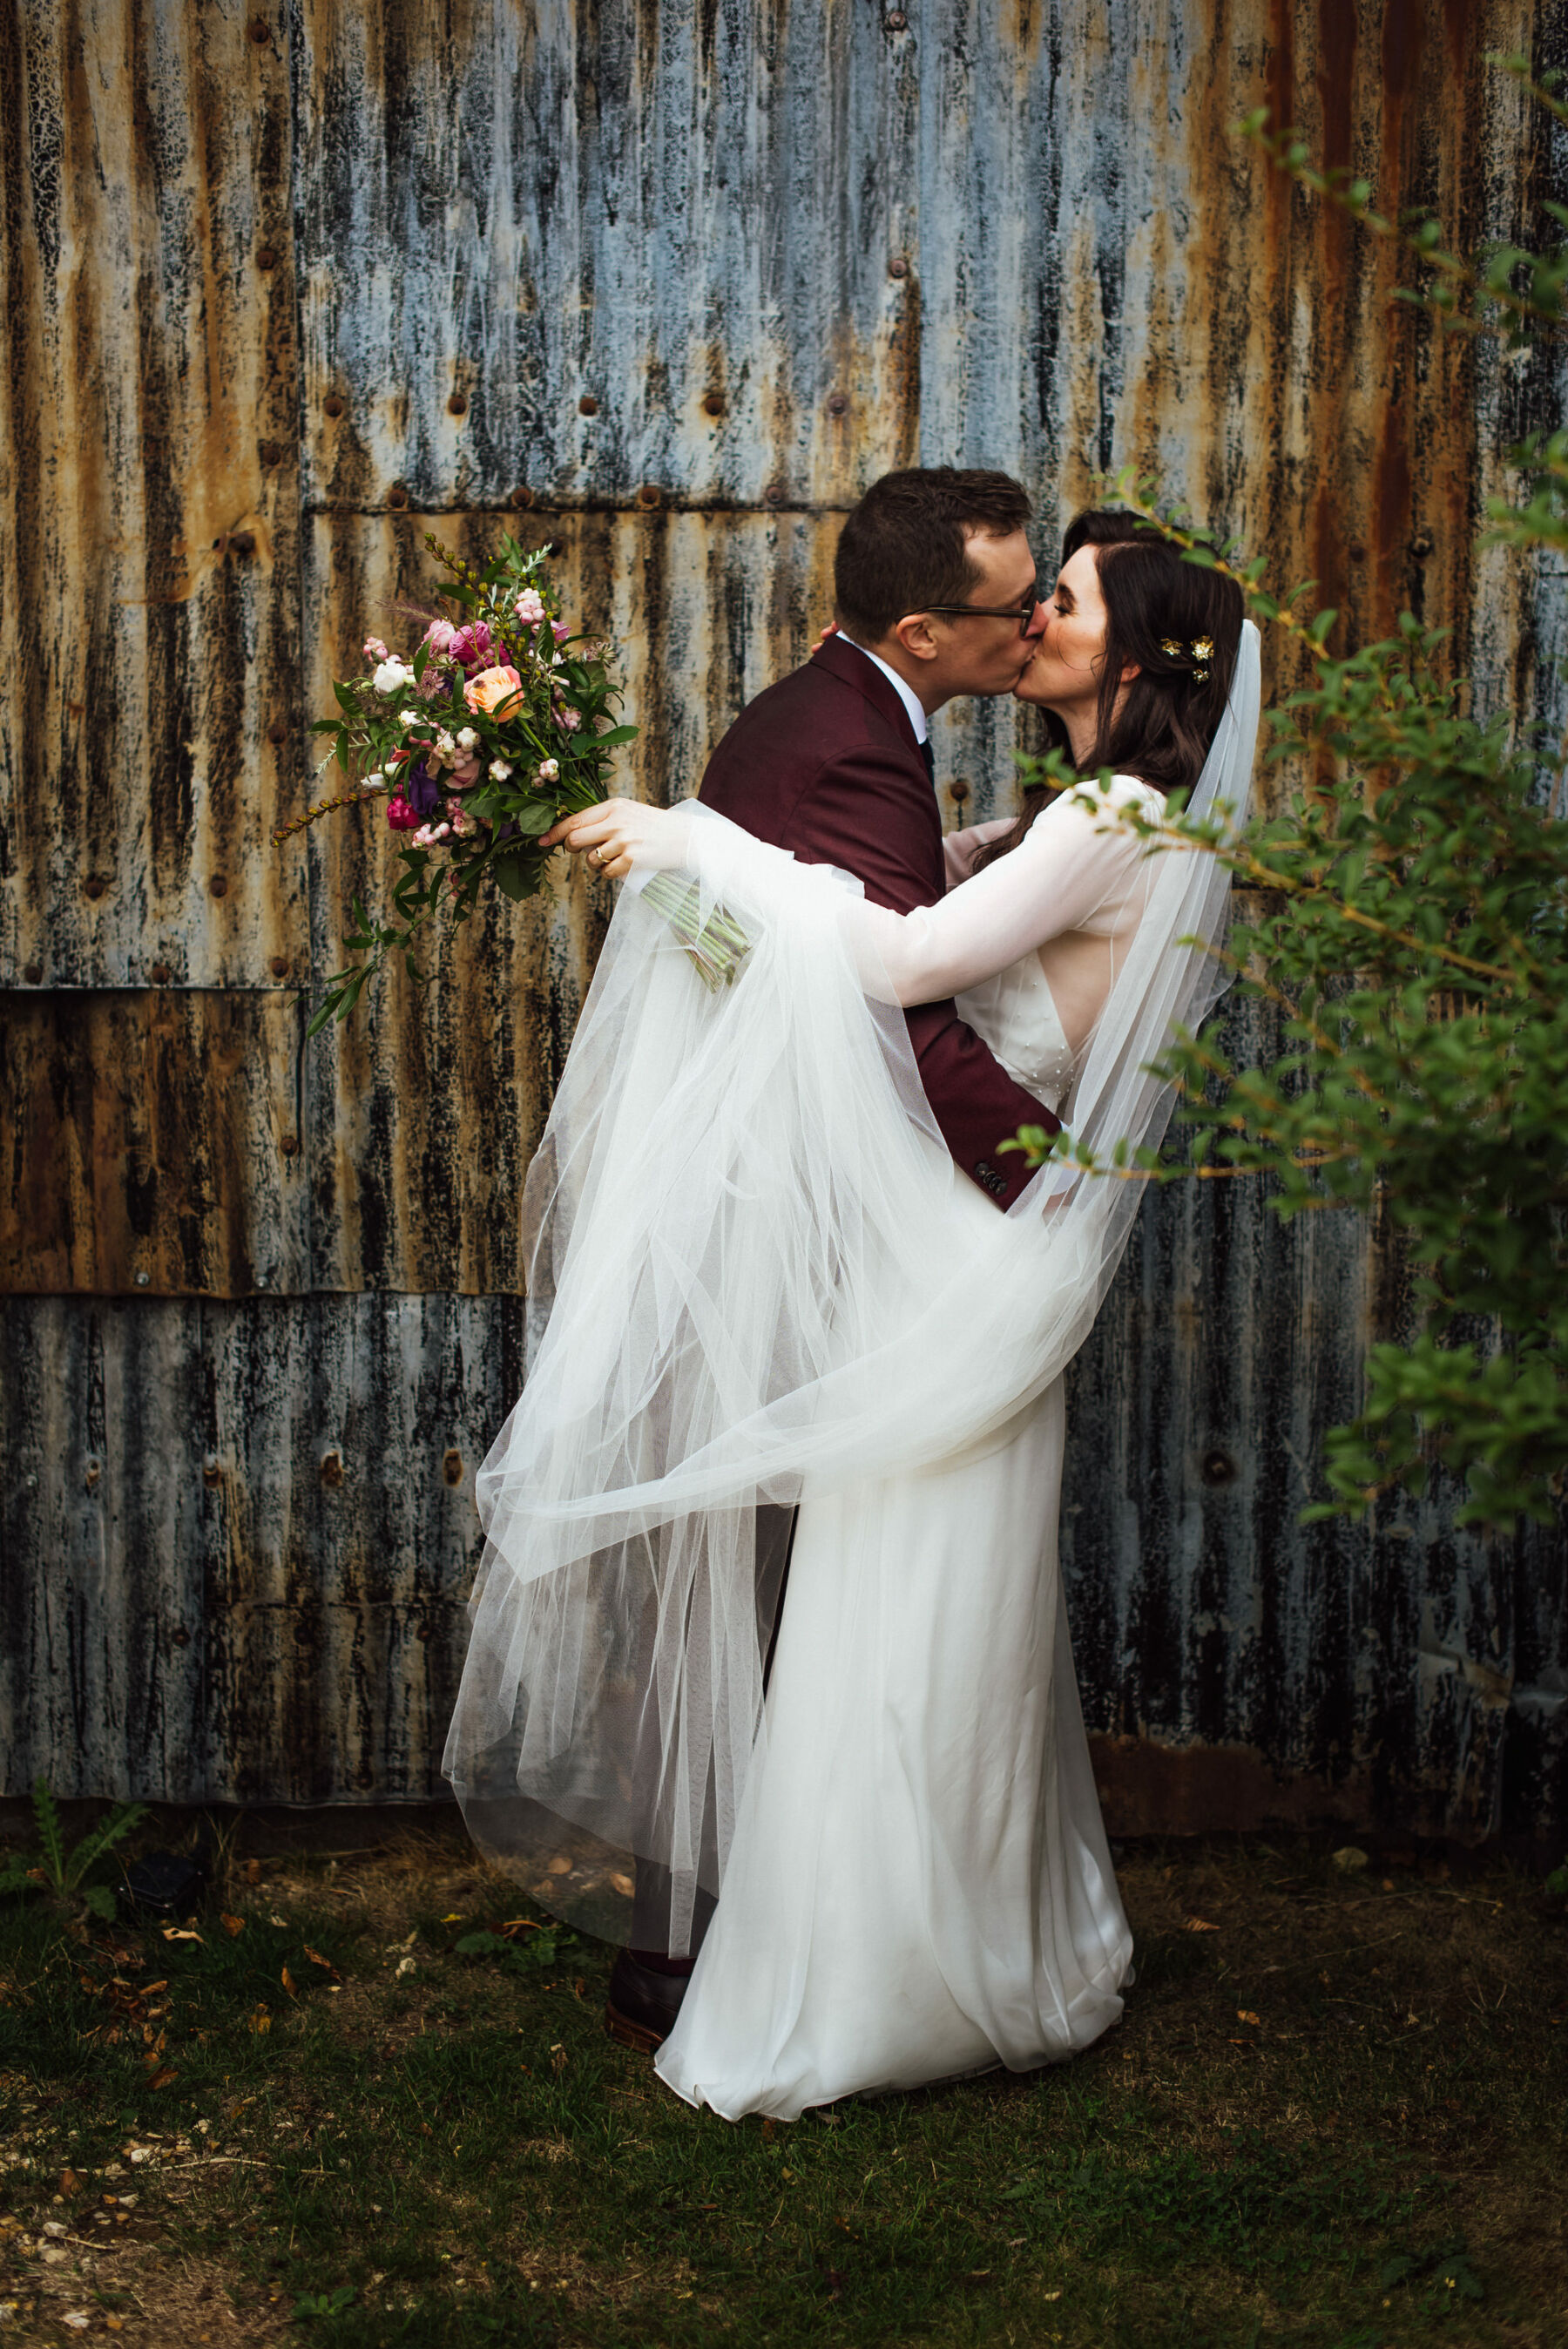 Andrea Hawkes bride kissing her groom in a burgundy suit.